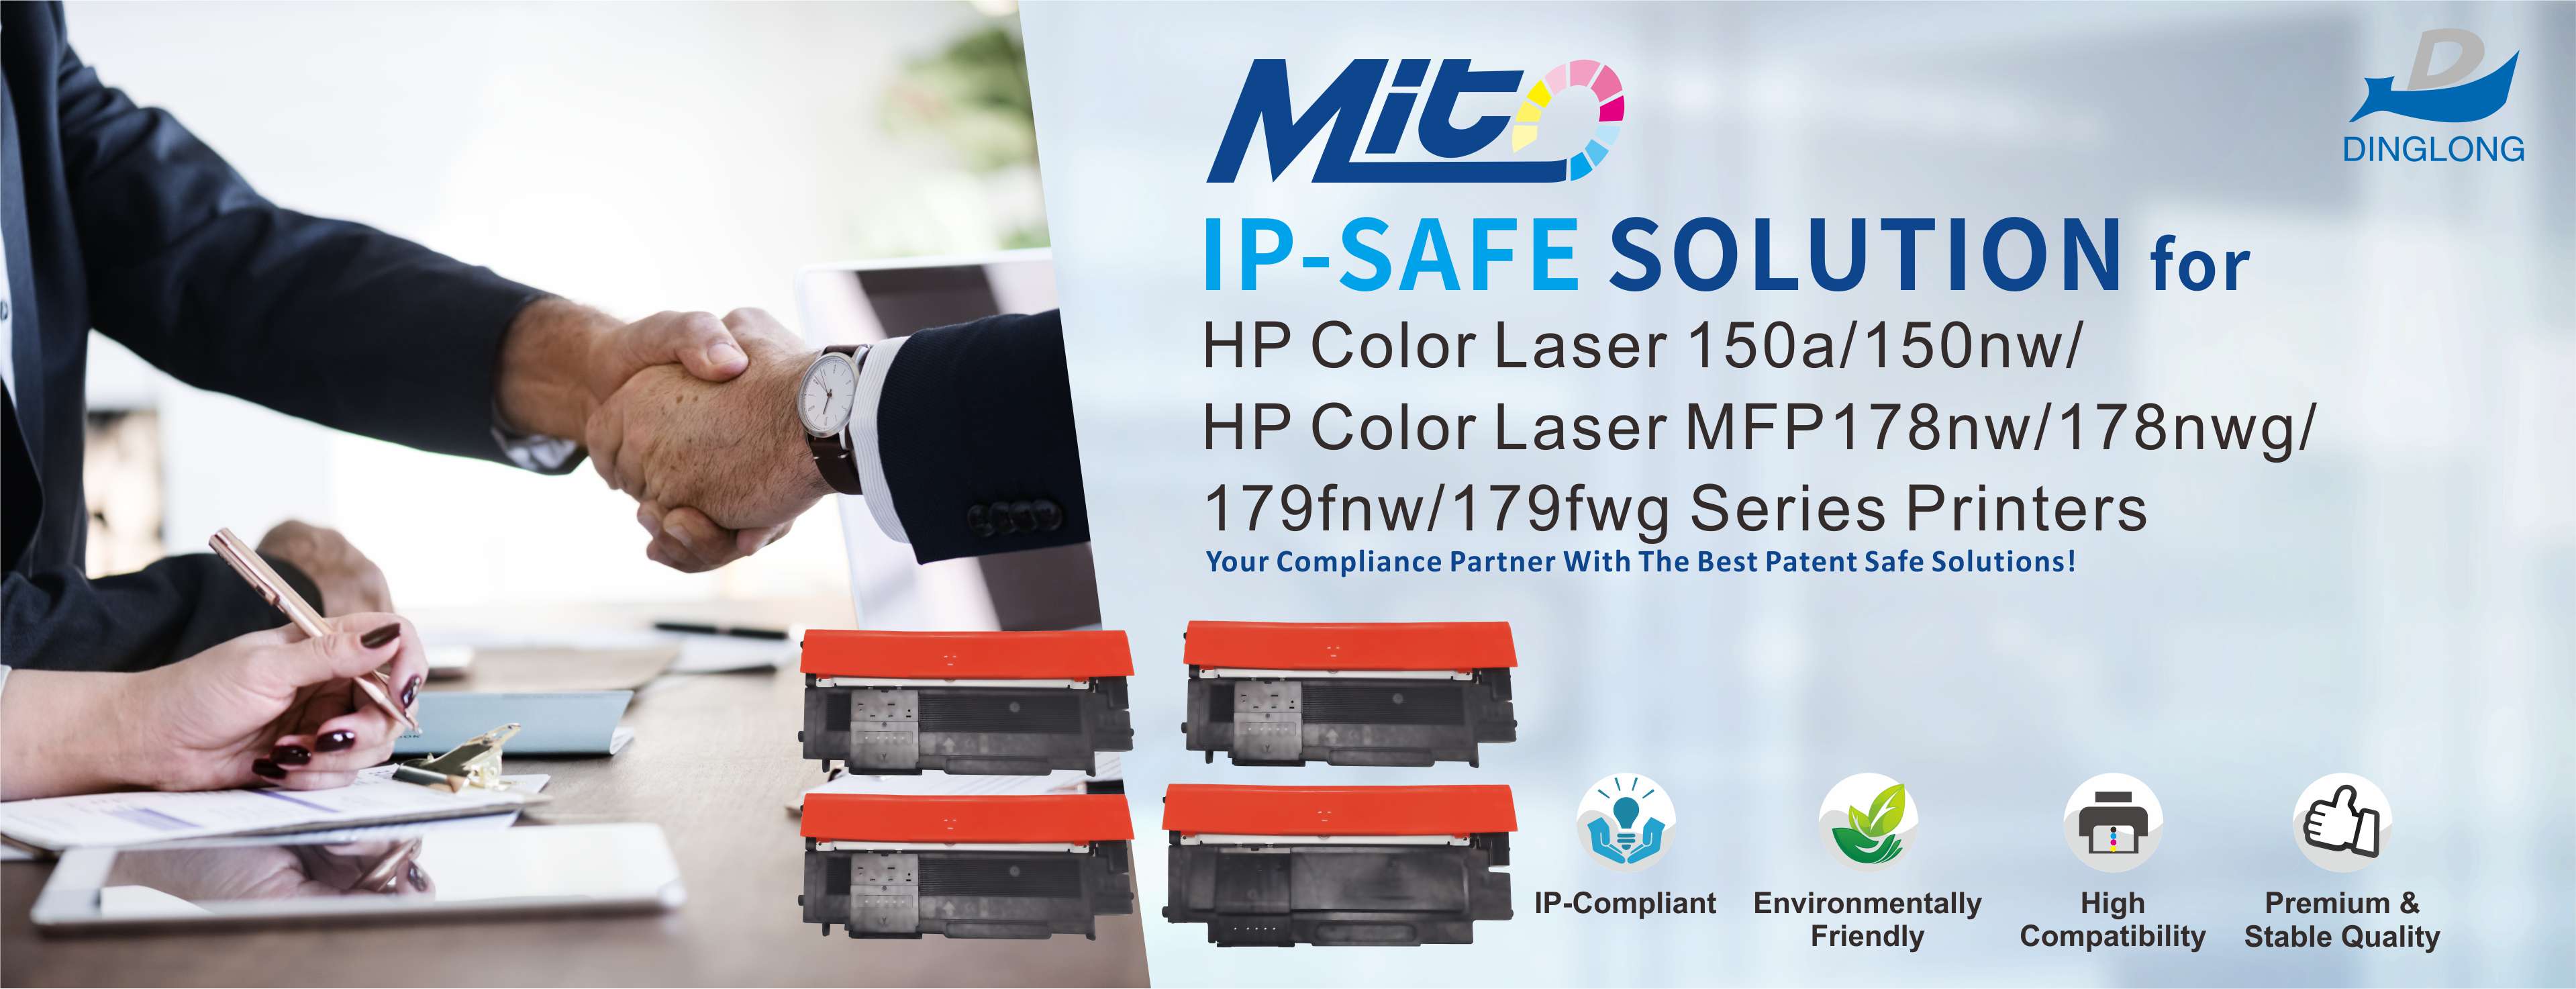 Mito Releases New Replacement Toner Cartridges for HP Printers